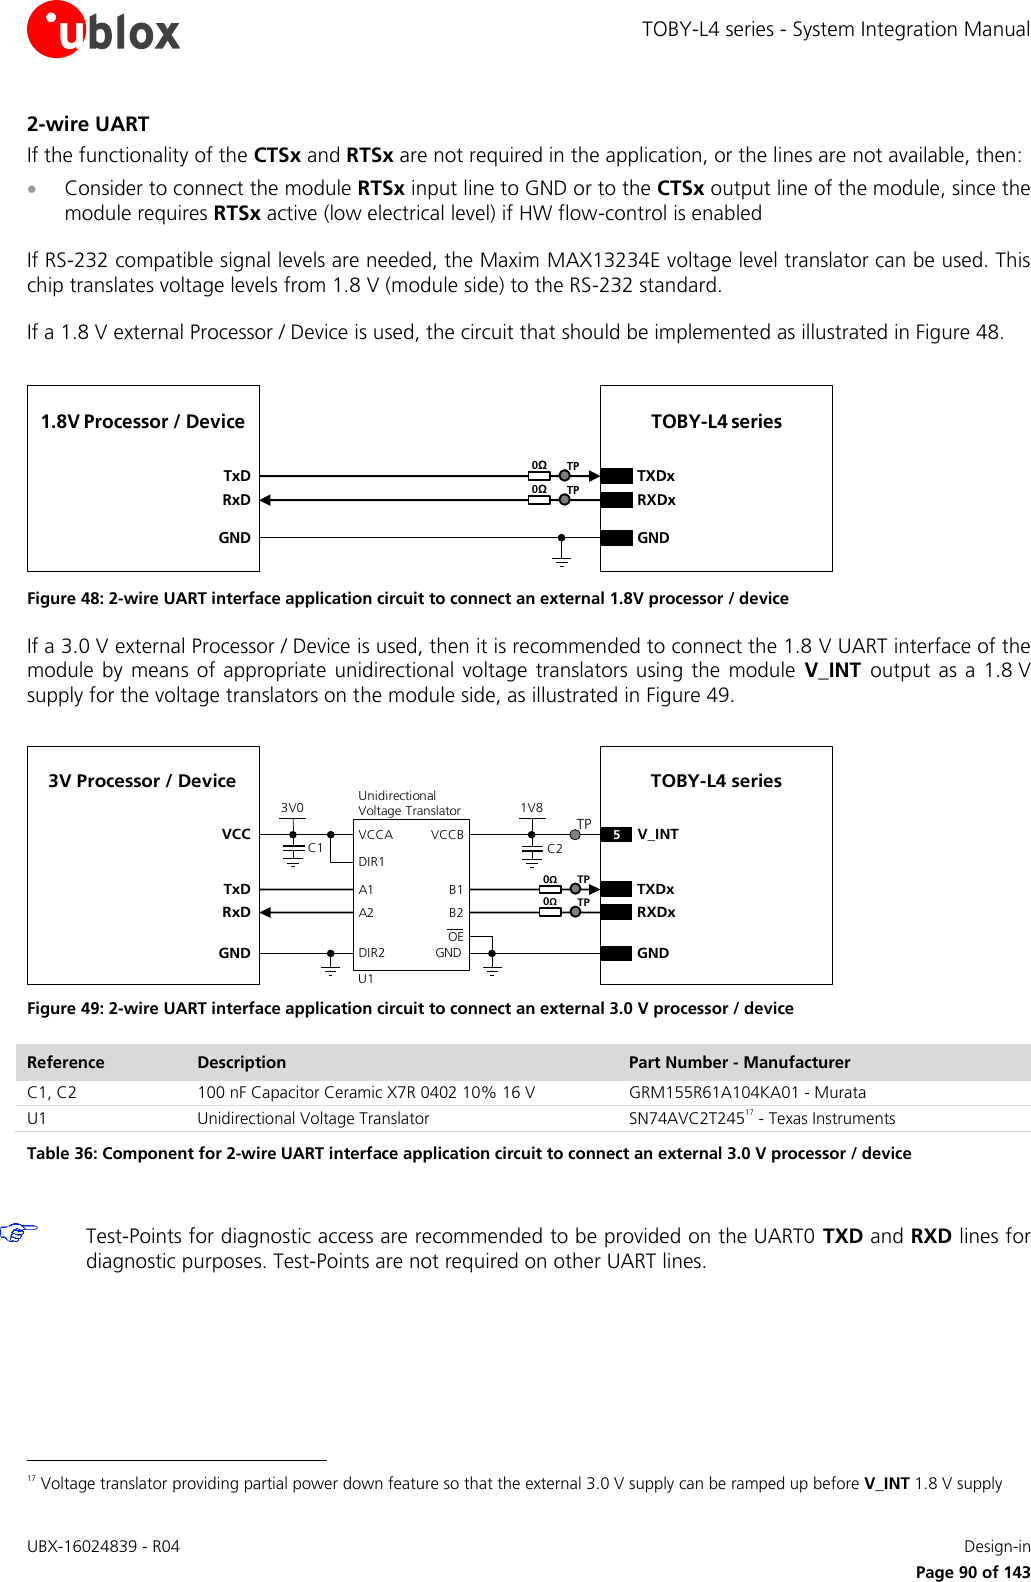 TOBY-L4 series - System Integration Manual UBX-16024839 - R04    Design-in     Page 90 of 143 2-wire UART If the functionality of the CTSx and RTSx are not required in the application, or the lines are not available, then:  Consider to connect the module RTSx input line to GND or to the CTSx output line of the module, since the module requires RTSx active (low electrical level) if HW flow-control is enabled   If RS-232 compatible signal levels are needed, the Maxim MAX13234E voltage level translator can be used. This chip translates voltage levels from 1.8 V (module side) to the RS-232 standard.   If a 1.8 V external Processor / Device is used, the circuit that should be implemented as illustrated in Figure 48.  TxD1.8V Processor / DeviceRxDGNDTOBY-L4 series TXDxRXDxGND0ΩTP0ΩTP Figure 48: 2-wire UART interface application circuit to connect an external 1.8V processor / device If a 3.0 V external Processor / Device is used, then it is recommended to connect the 1.8 V UART interface of the module by  means of appropriate unidirectional voltage translators using the  module  V_INT  output as a  1.8 V supply for the voltage translators on the module side, as illustrated in Figure 49.  5V_INTTxD3V Processor / DeviceRxDGNDTOBY-L4 series TXDxRXDxGND1V8B1 A1GNDU1VCCBVCCAUnidirectionalVoltage TranslatorC1 C23V0DIR1DIR2OEVCCB2 A2TP0ΩTP0ΩTP Figure 49: 2-wire UART interface application circuit to connect an external 3.0 V processor / device Reference Description Part Number - Manufacturer C1, C2 100 nF Capacitor Ceramic X7R 0402 10% 16 V GRM155R61A104KA01 - Murata U1 Unidirectional Voltage Translator SN74AVC2T24517 - Texas Instruments Table 36: Component for 2-wire UART interface application circuit to connect an external 3.0 V processor / device   Test-Points for diagnostic access are recommended to be provided on the UART0 TXD and RXD lines for diagnostic purposes. Test-Points are not required on other UART lines.                                                        17 Voltage translator providing partial power down feature so that the external 3.0 V supply can be ramped up before V_INT 1.8 V supply 